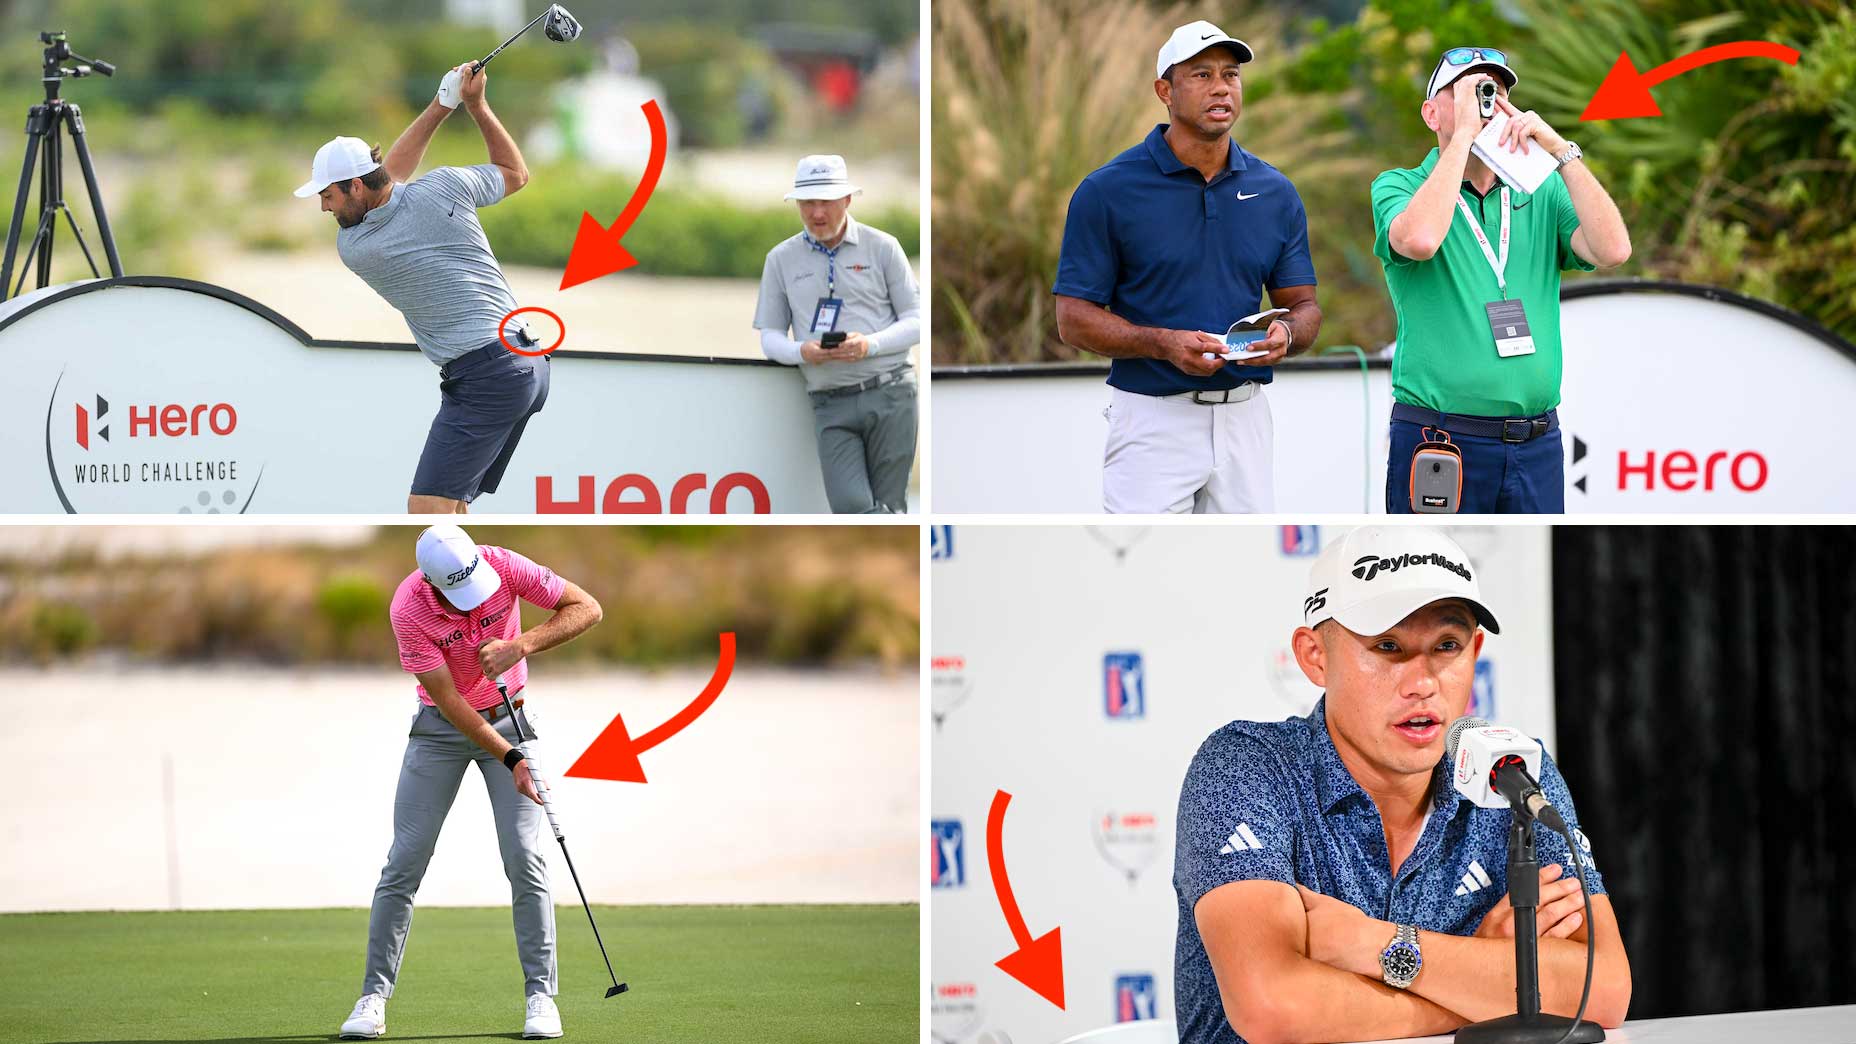 Scottie Scheffler with a new bit of PGA Tour technology, Tiger Woods with a new face on the bag, Collin Morikawa with a new perspective on sitting and Will Zalatoris with a new putter in his bag. (Clockwise from top left)